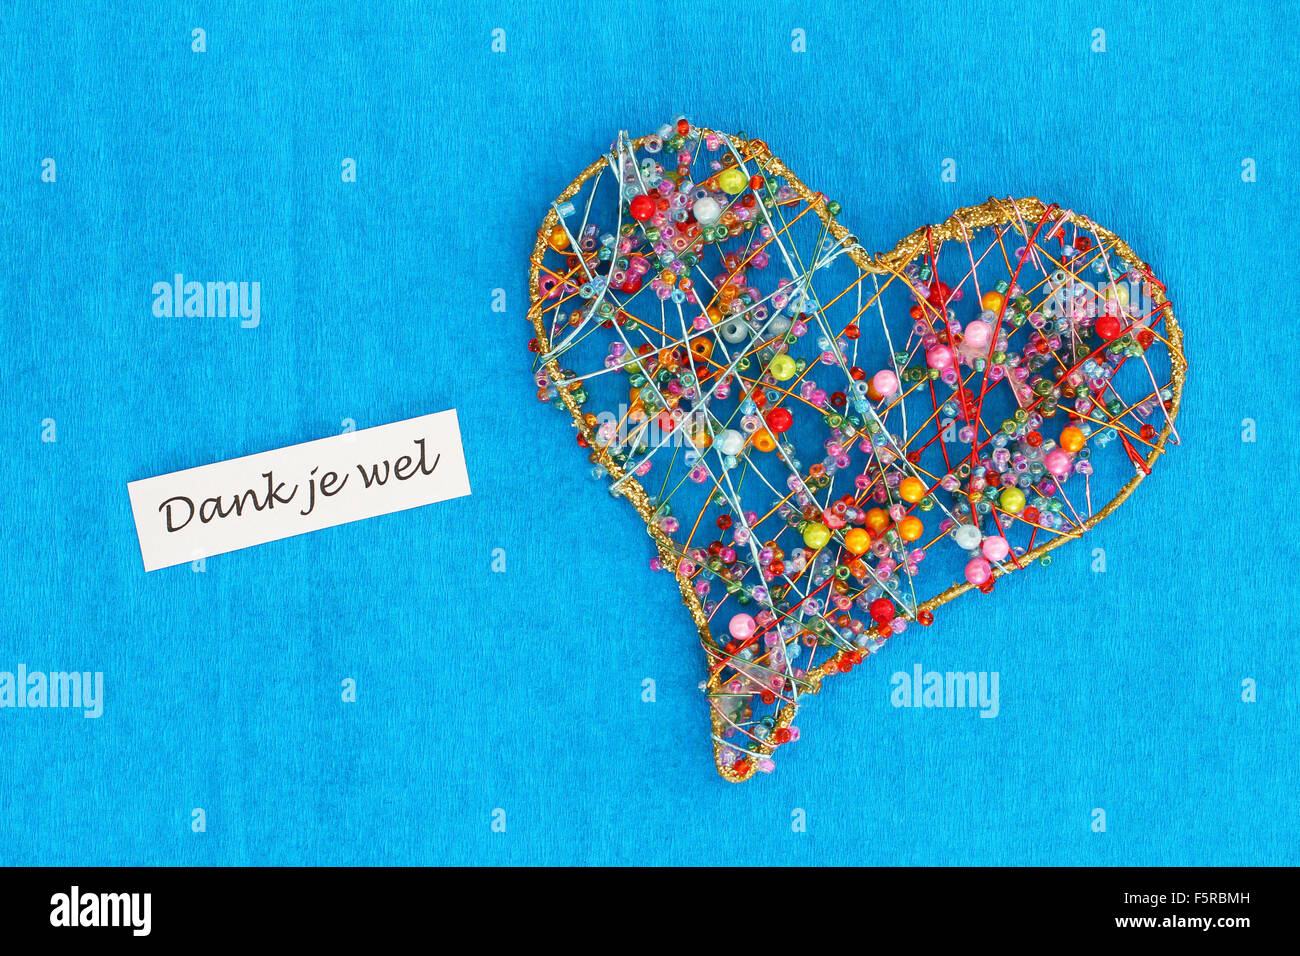 Dank je wel (which means thank you in Dutch) card with heart made of colorful beads on blue background Stock Photo